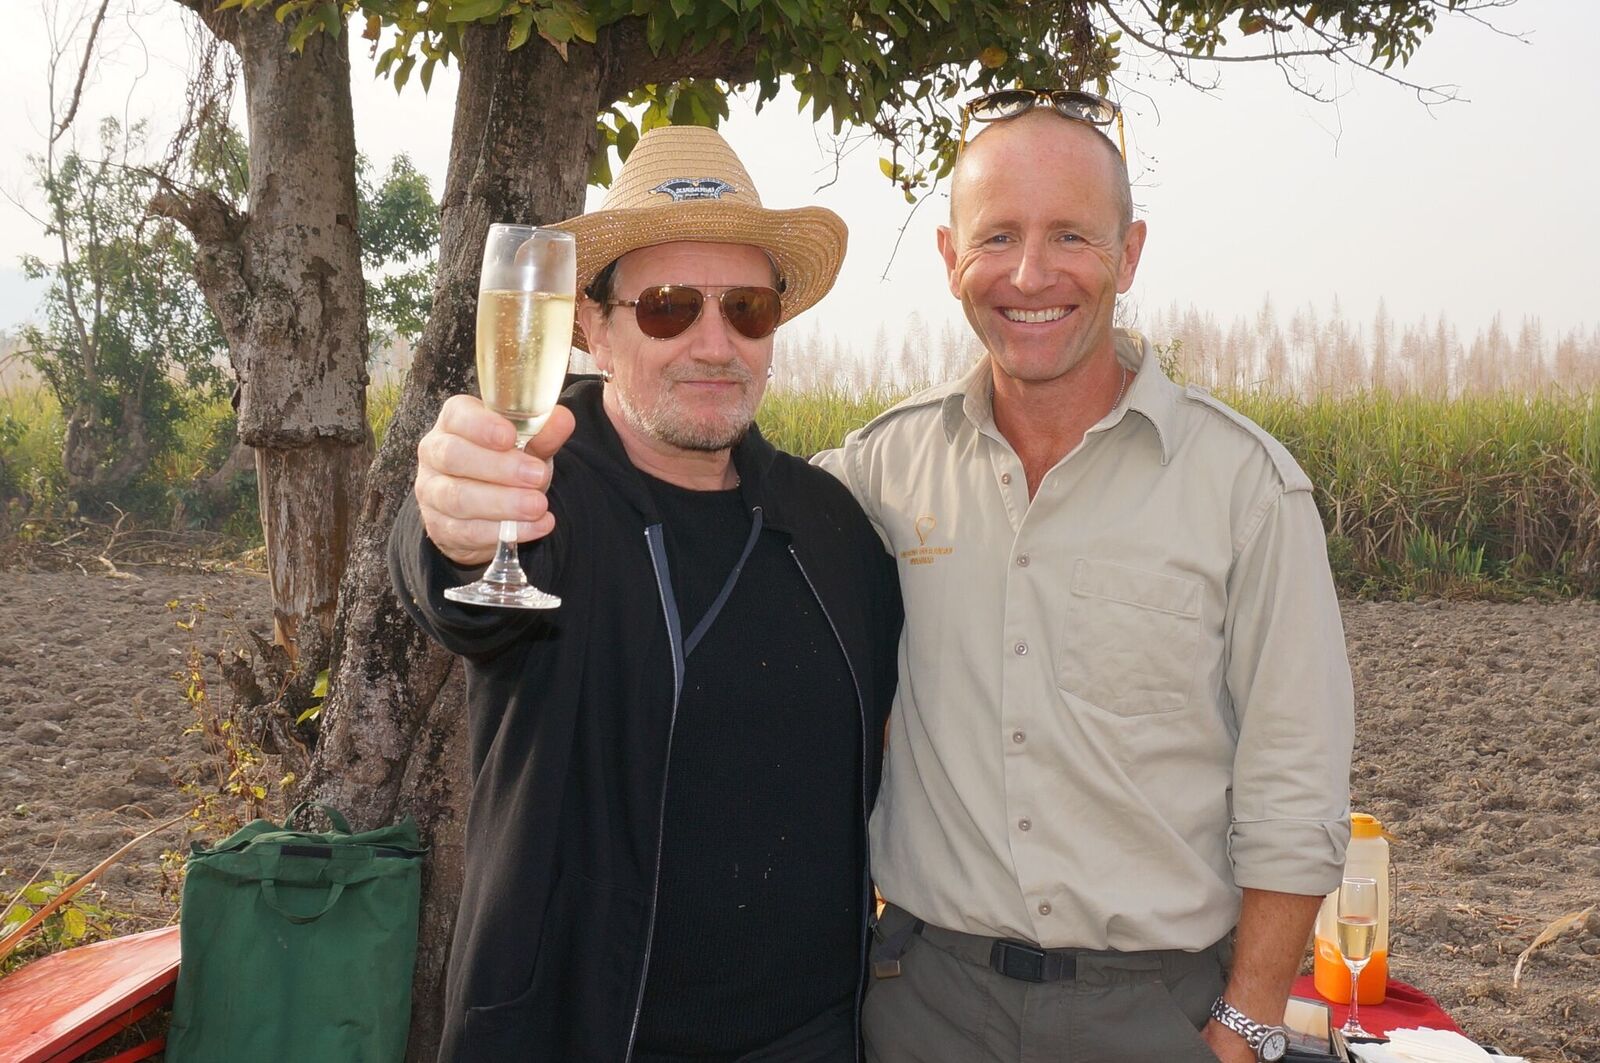 Trailer firm helped get rock legend Bono up up and away over Burma